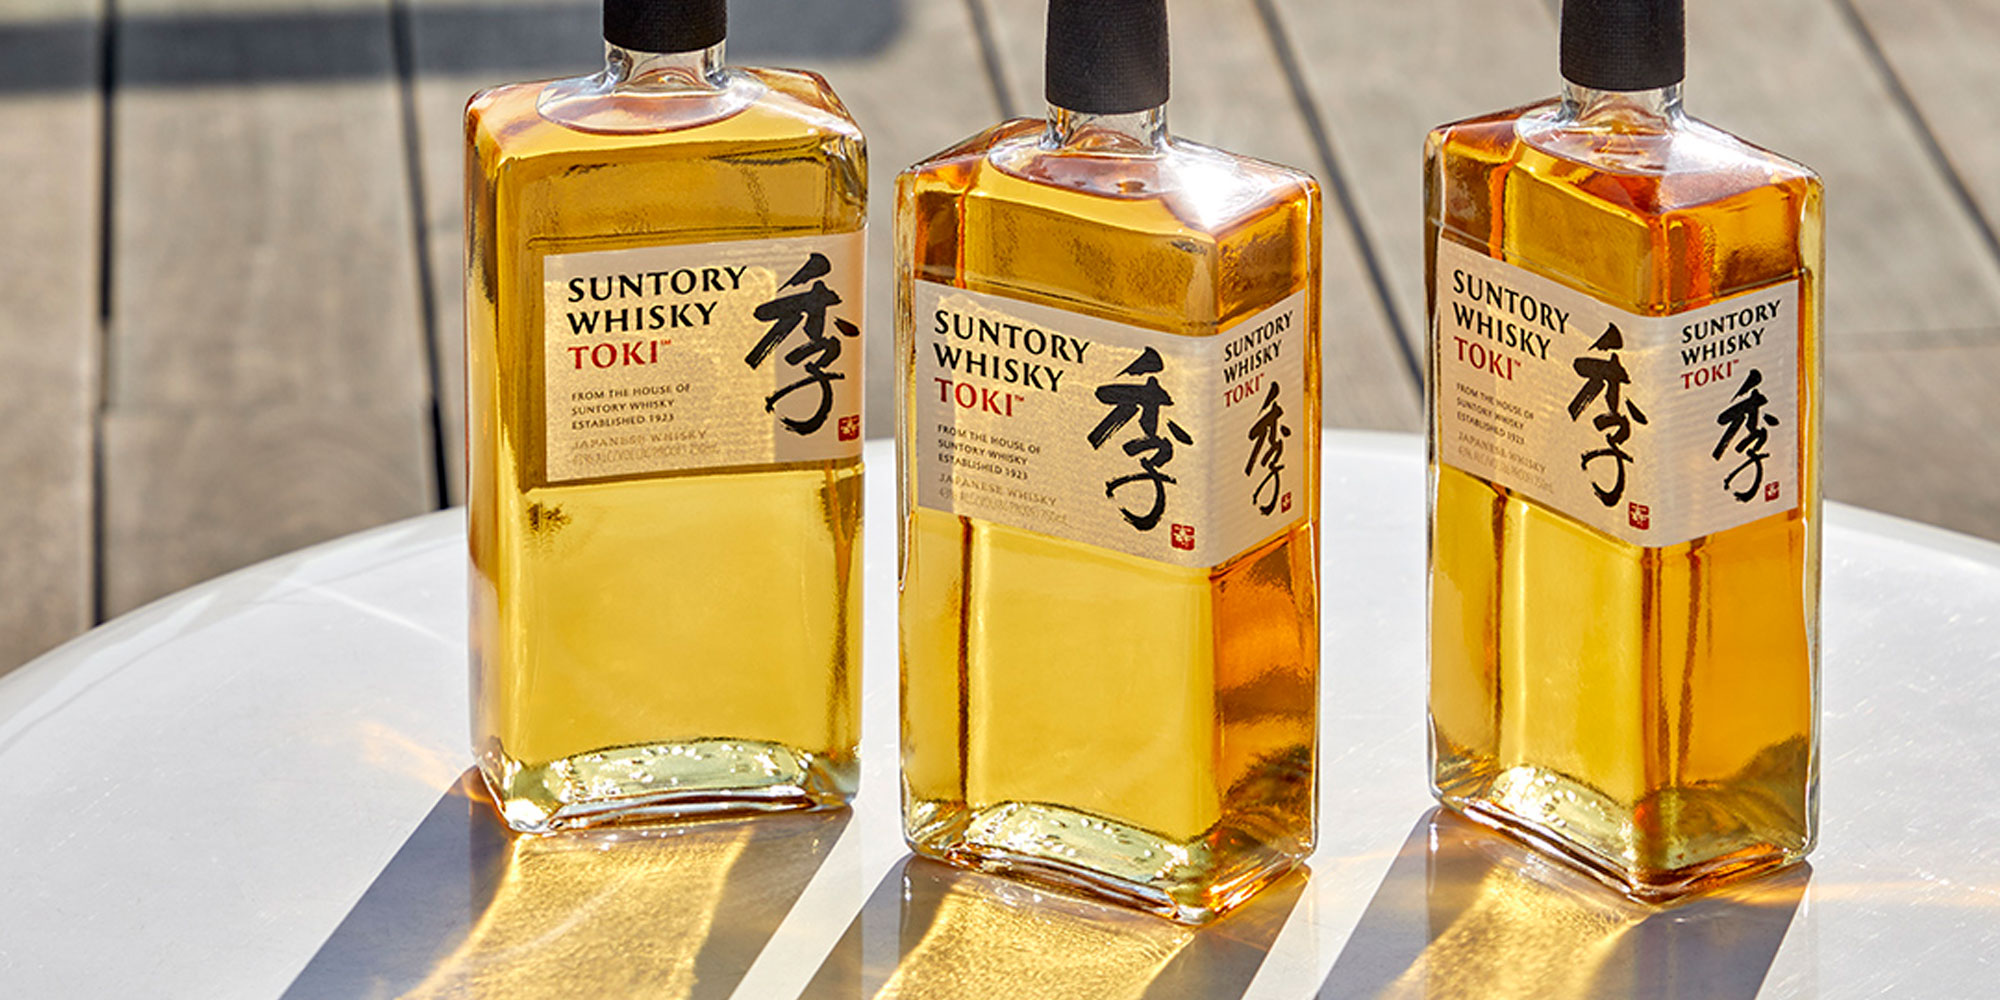 Toki® Whisky Blends the Best of the Old World With Japanese Modernity |  VinePair